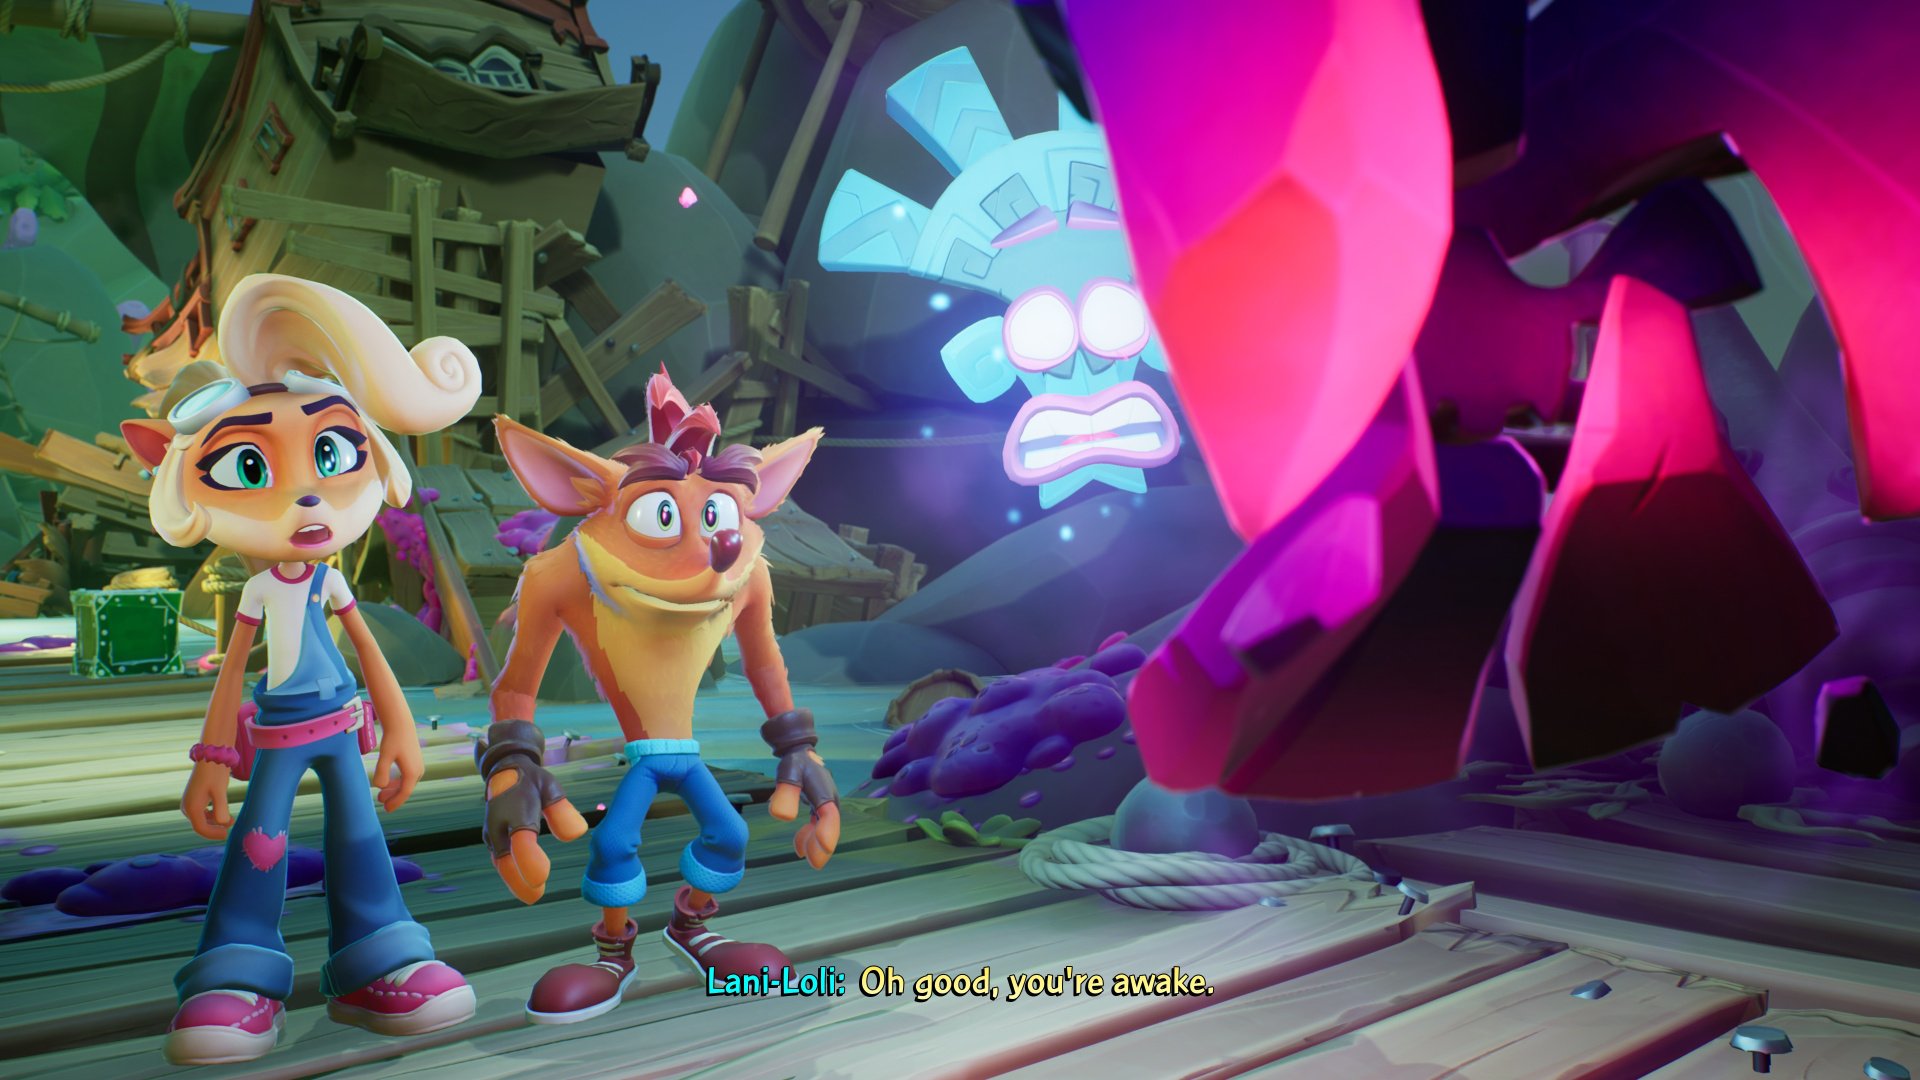 Crash Bandicoot 4: It's About Time Xbox One Brand New